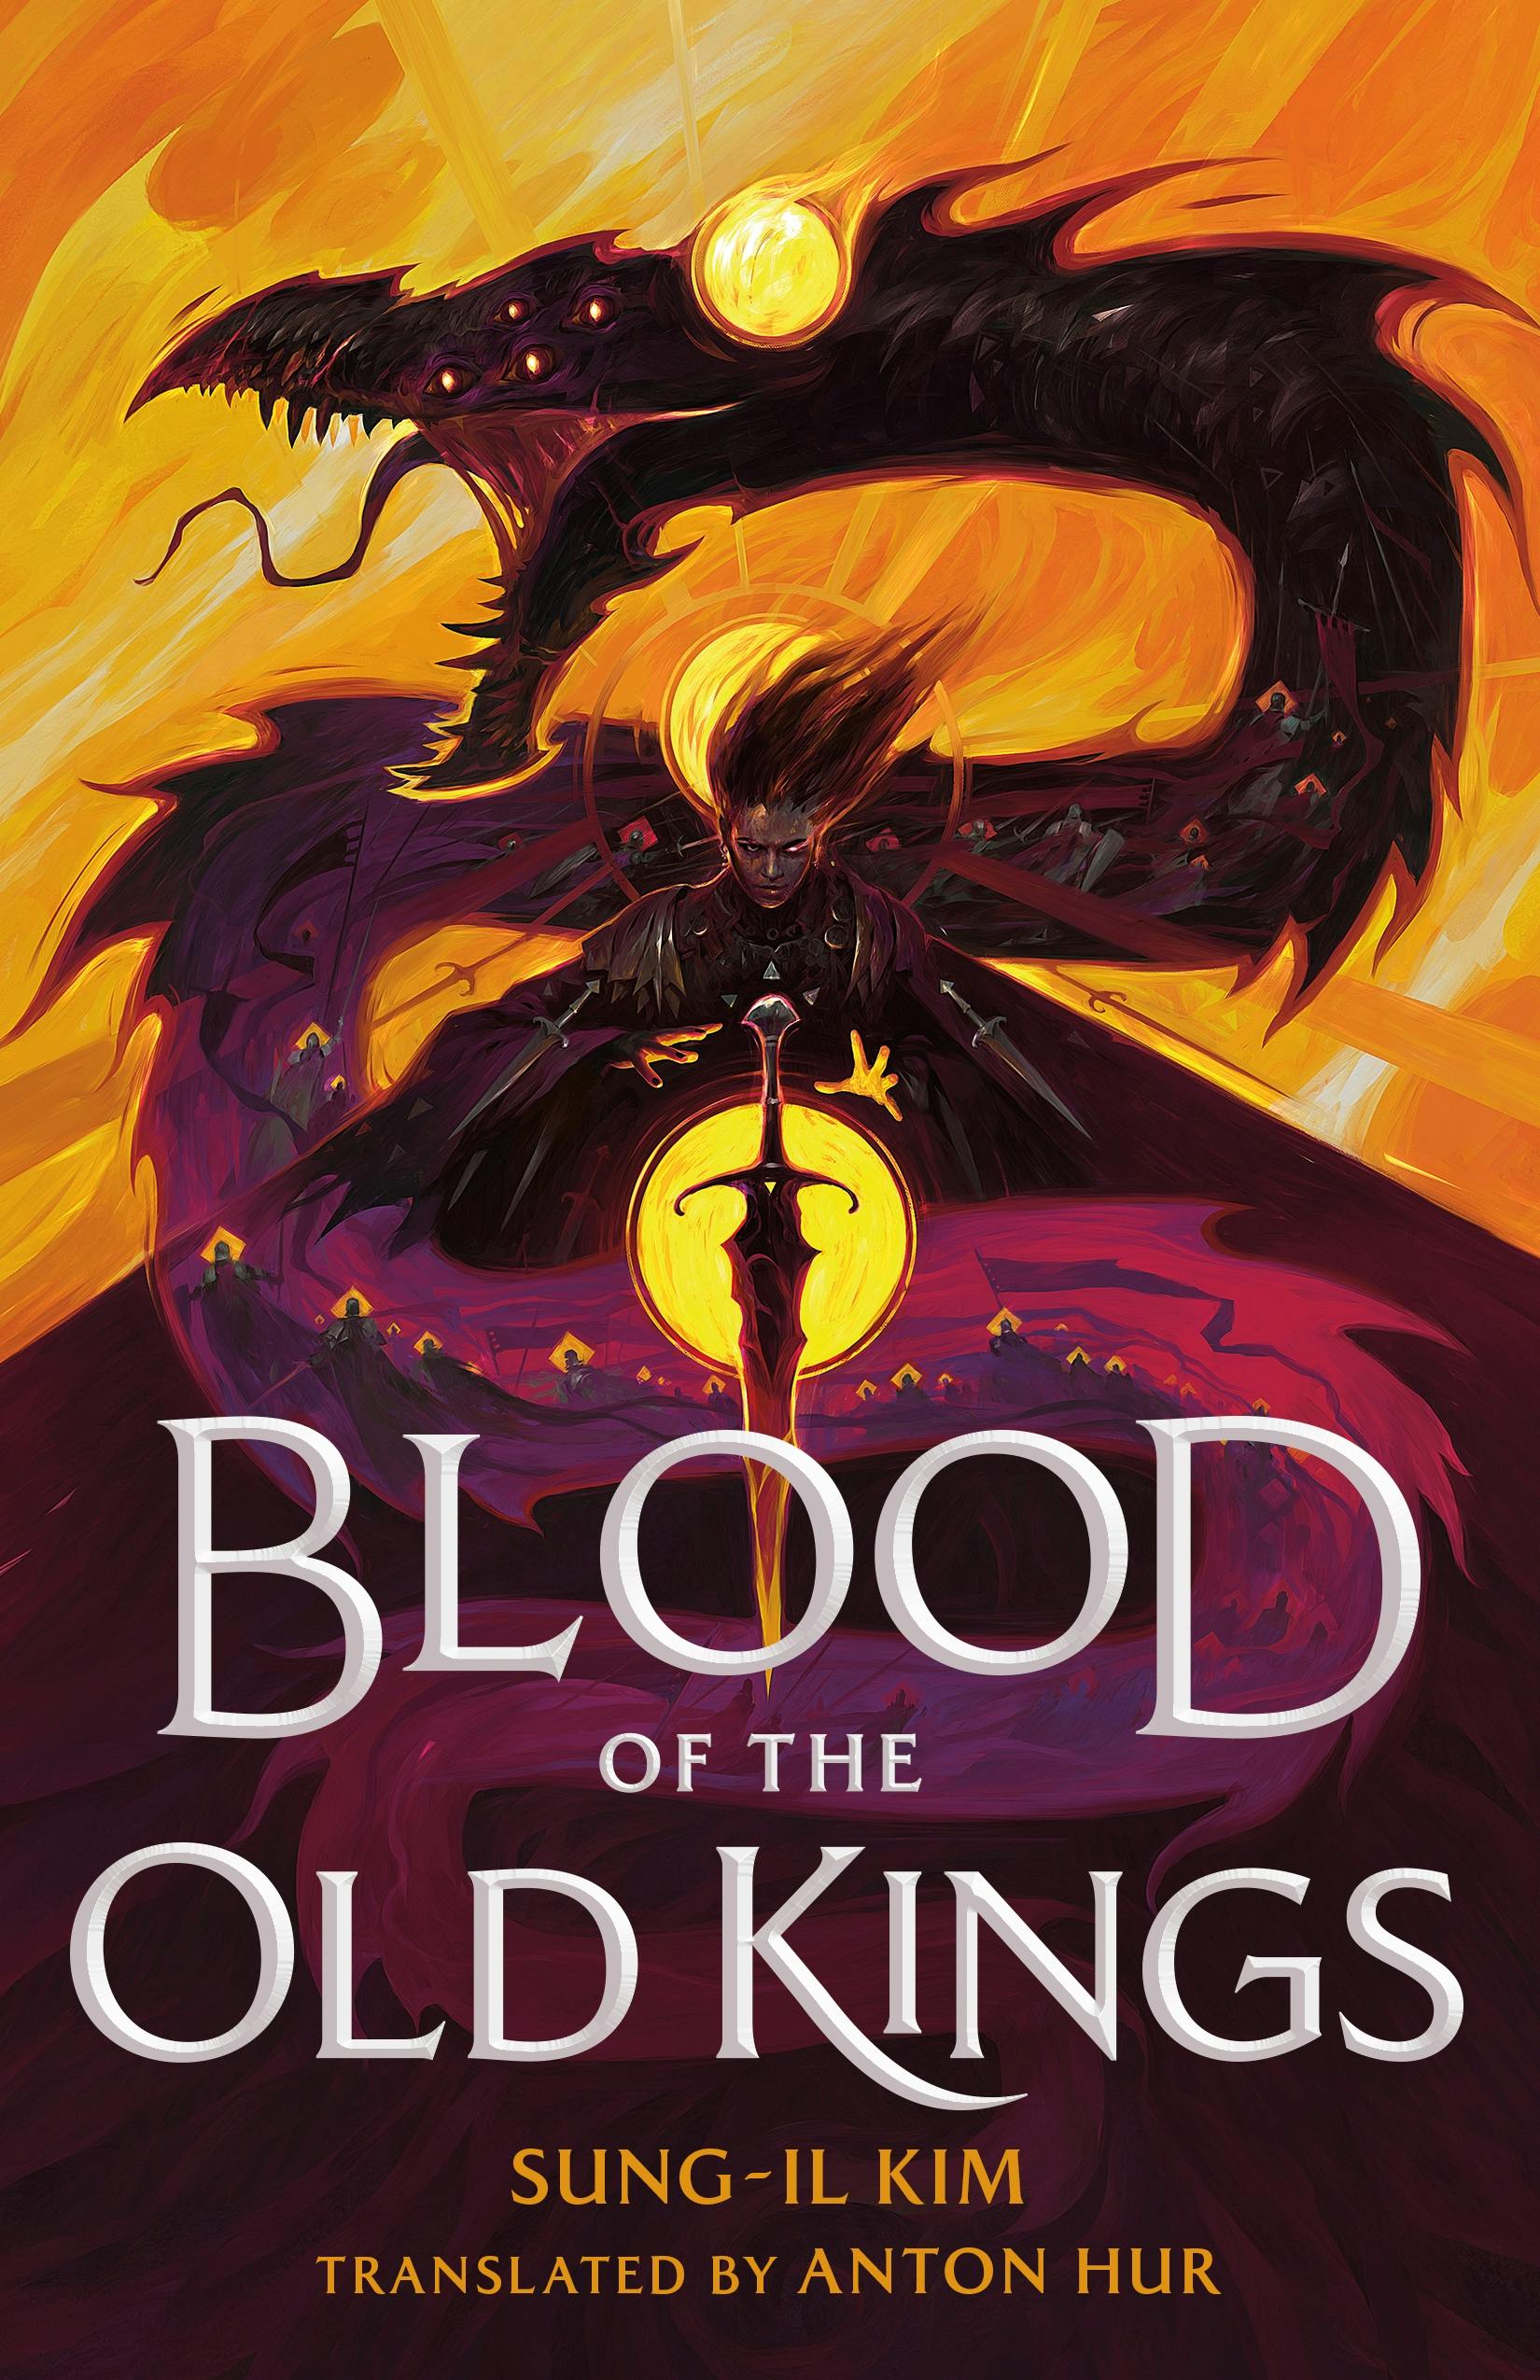 Cover for the book titled as: Blood of the Old Kings